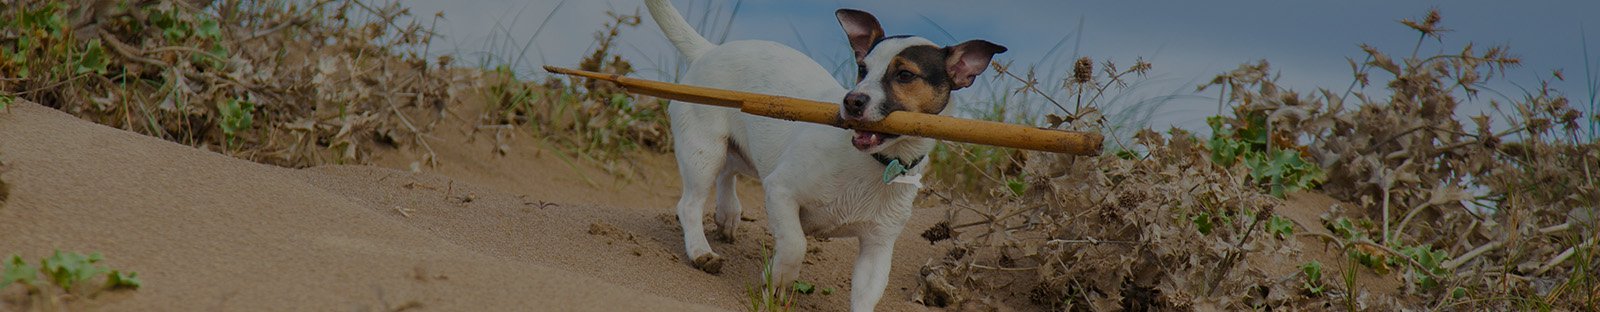 Dog on sand dune with stick in mouth